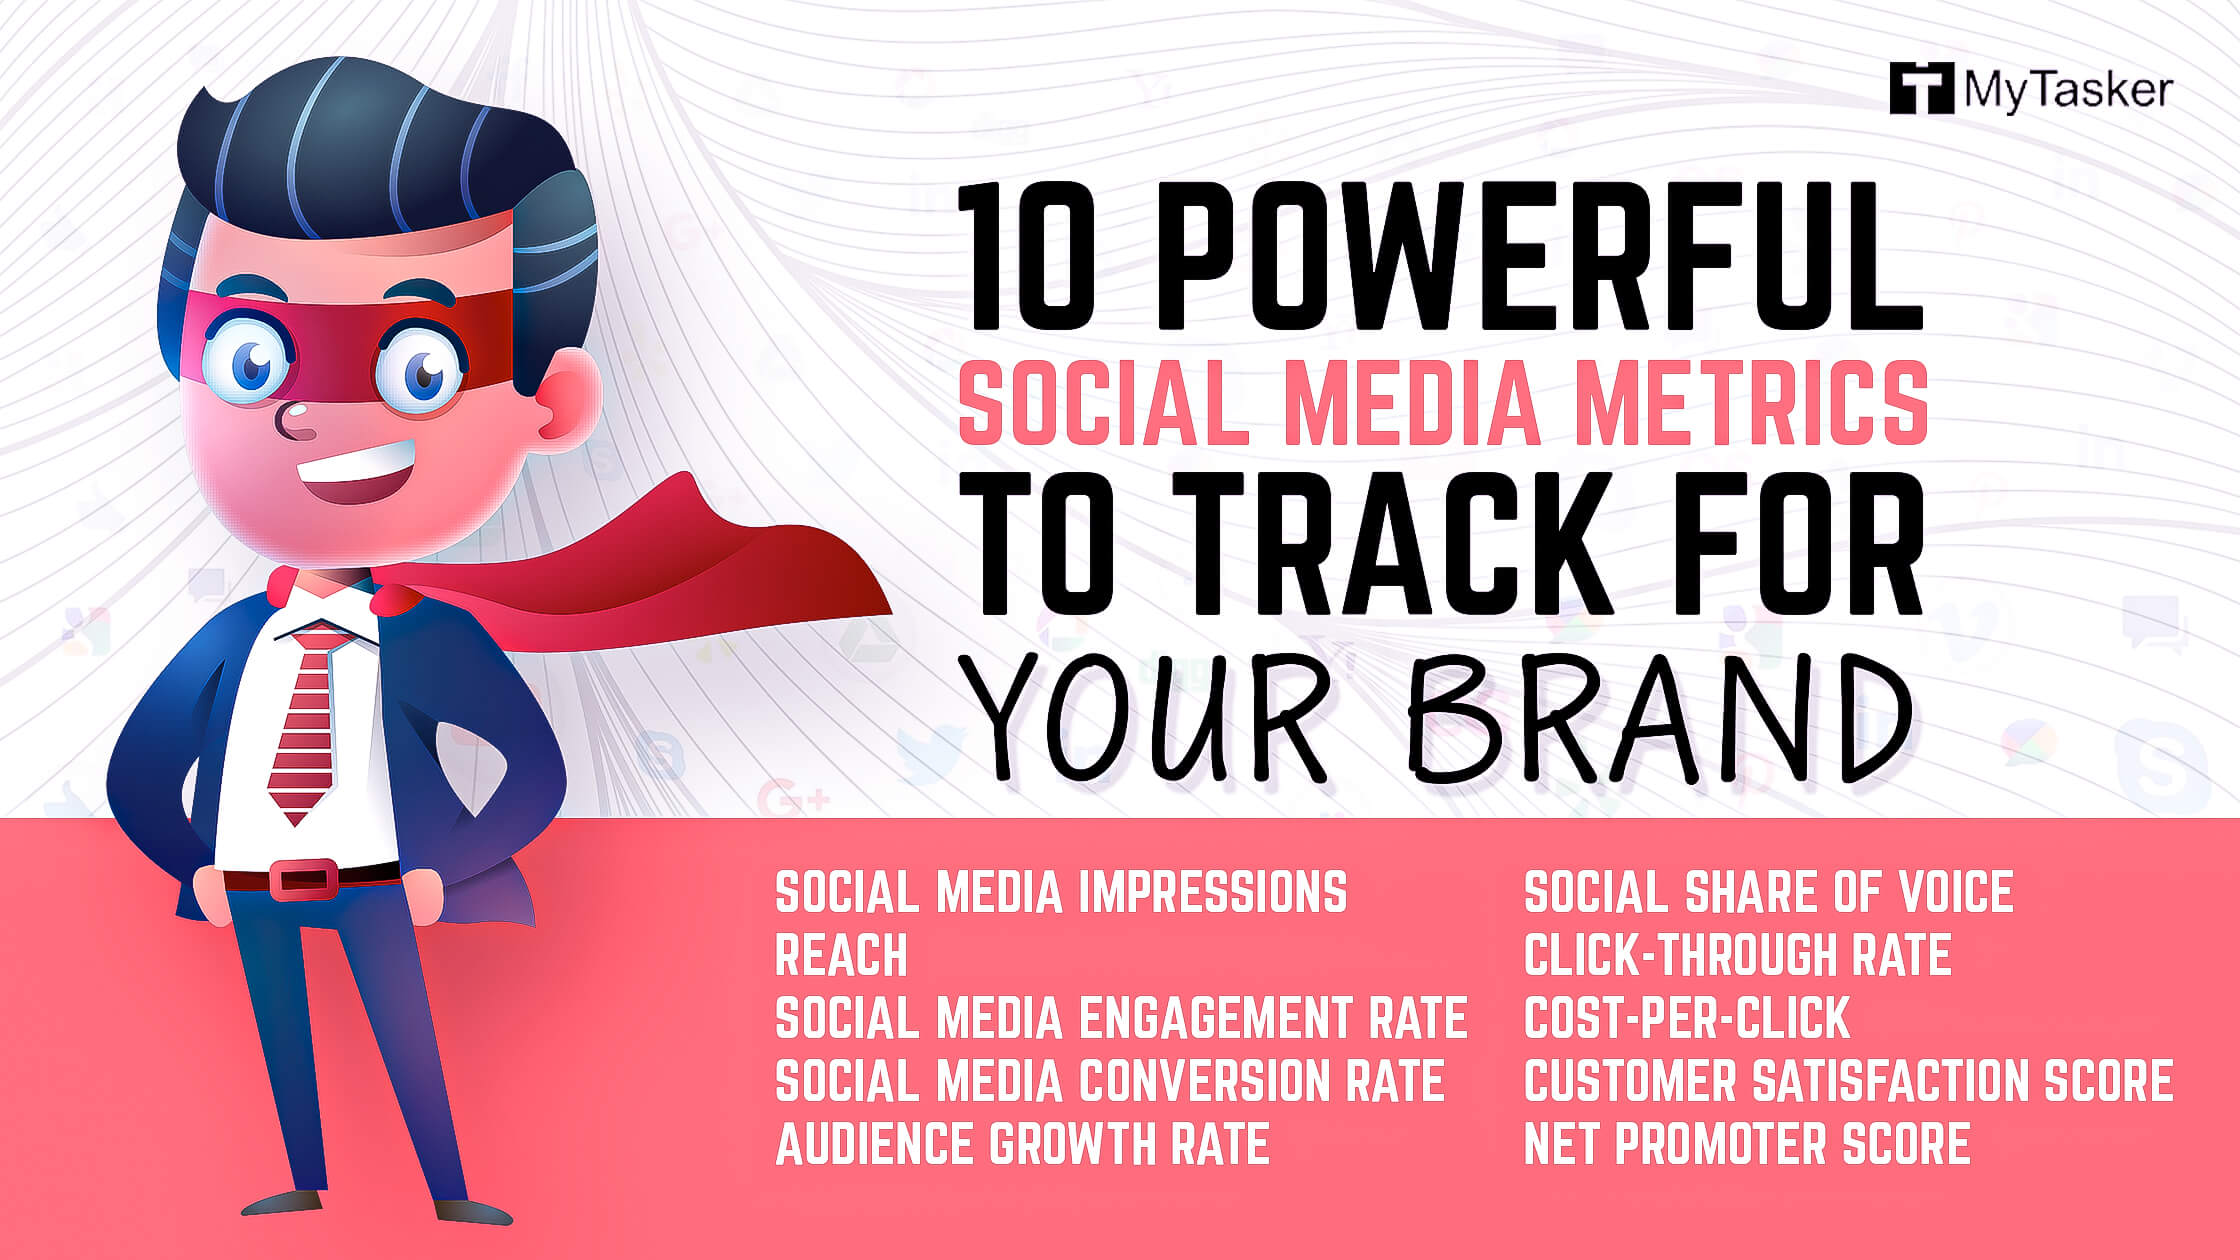 10 Powerful Social Media Metrics to Track for Your Brand